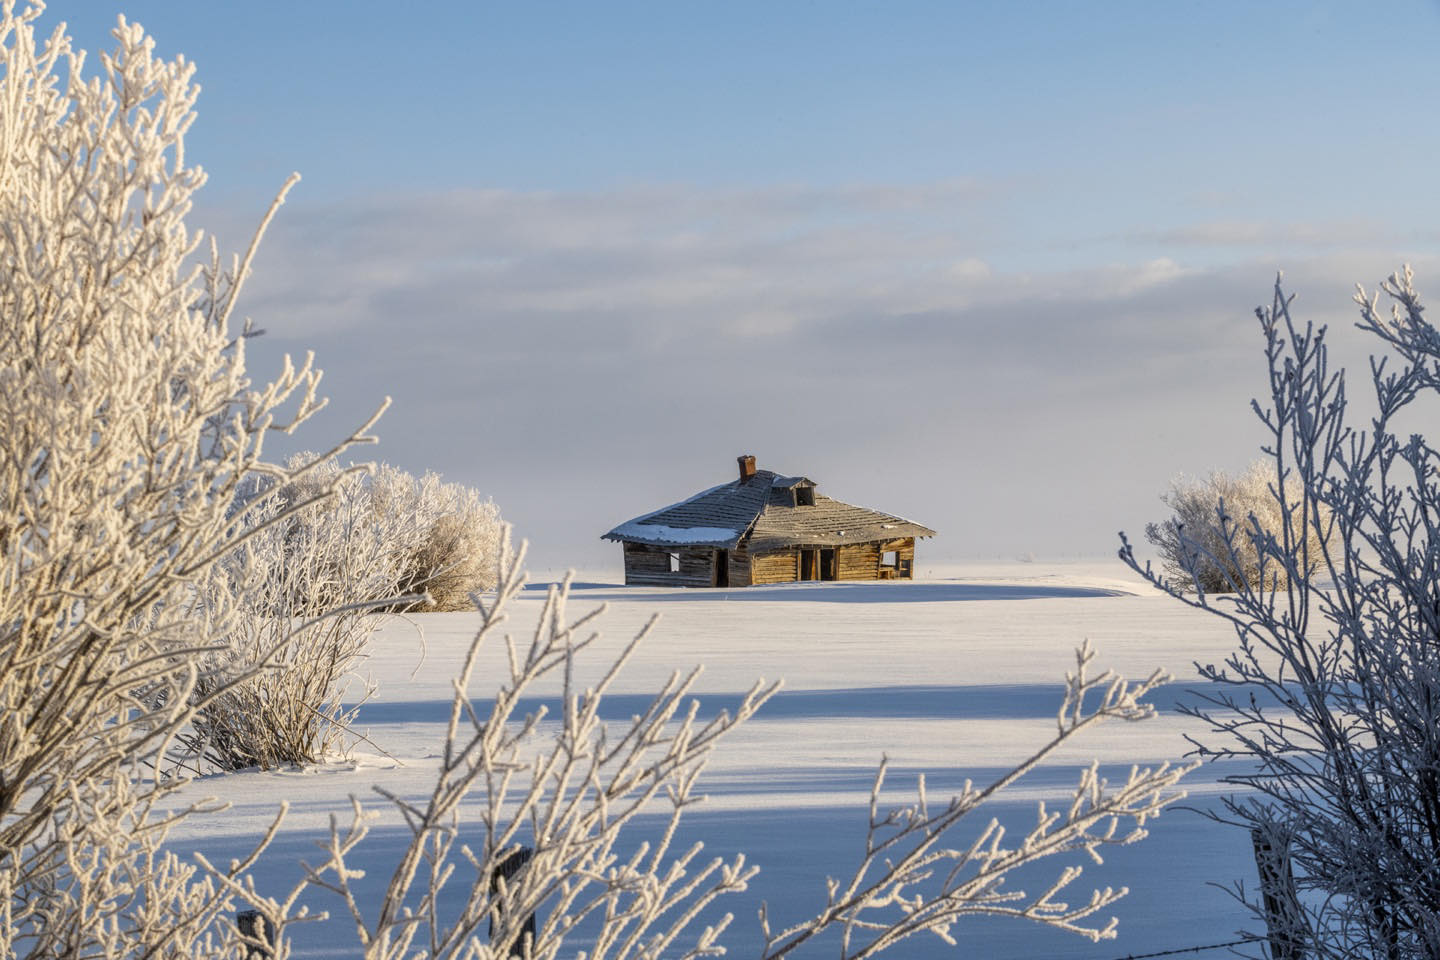 An old house we call, “Windblown” is on the unplowed road behind our Victor, Idaho winter home. On these cold January mornings all the trees and plants along the valley roads are coated with heavy hoarfrost, providing great framing options for subjects in the open fields. #tetonvalleyidaho #victoridaho #orcuttphotography #bestofthegemstate #idahowinterphotography #windblown